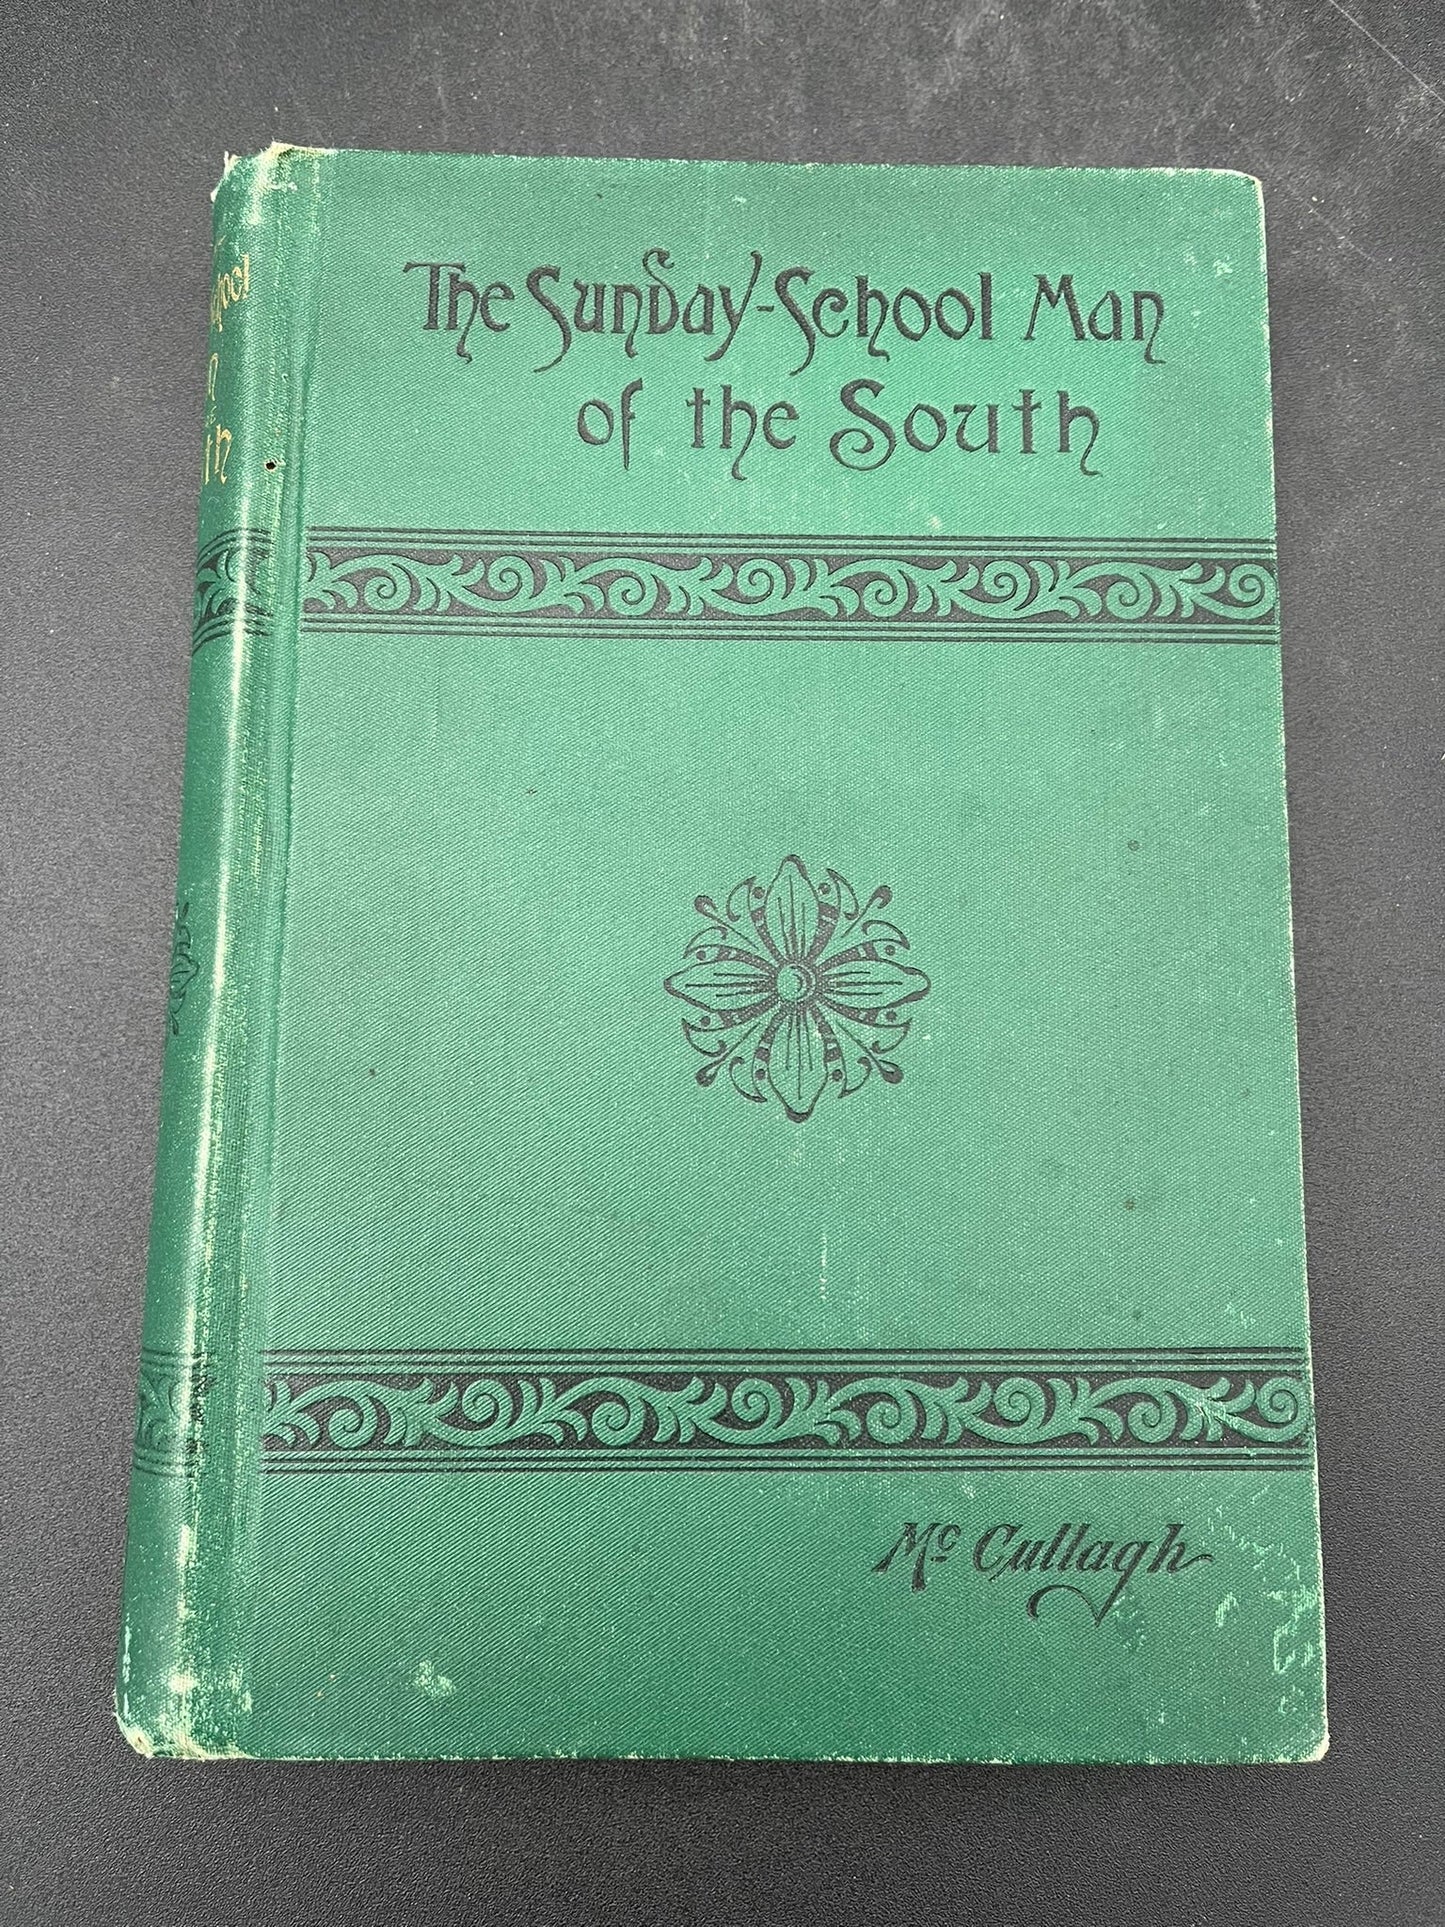 The Sunday-School Man of the South